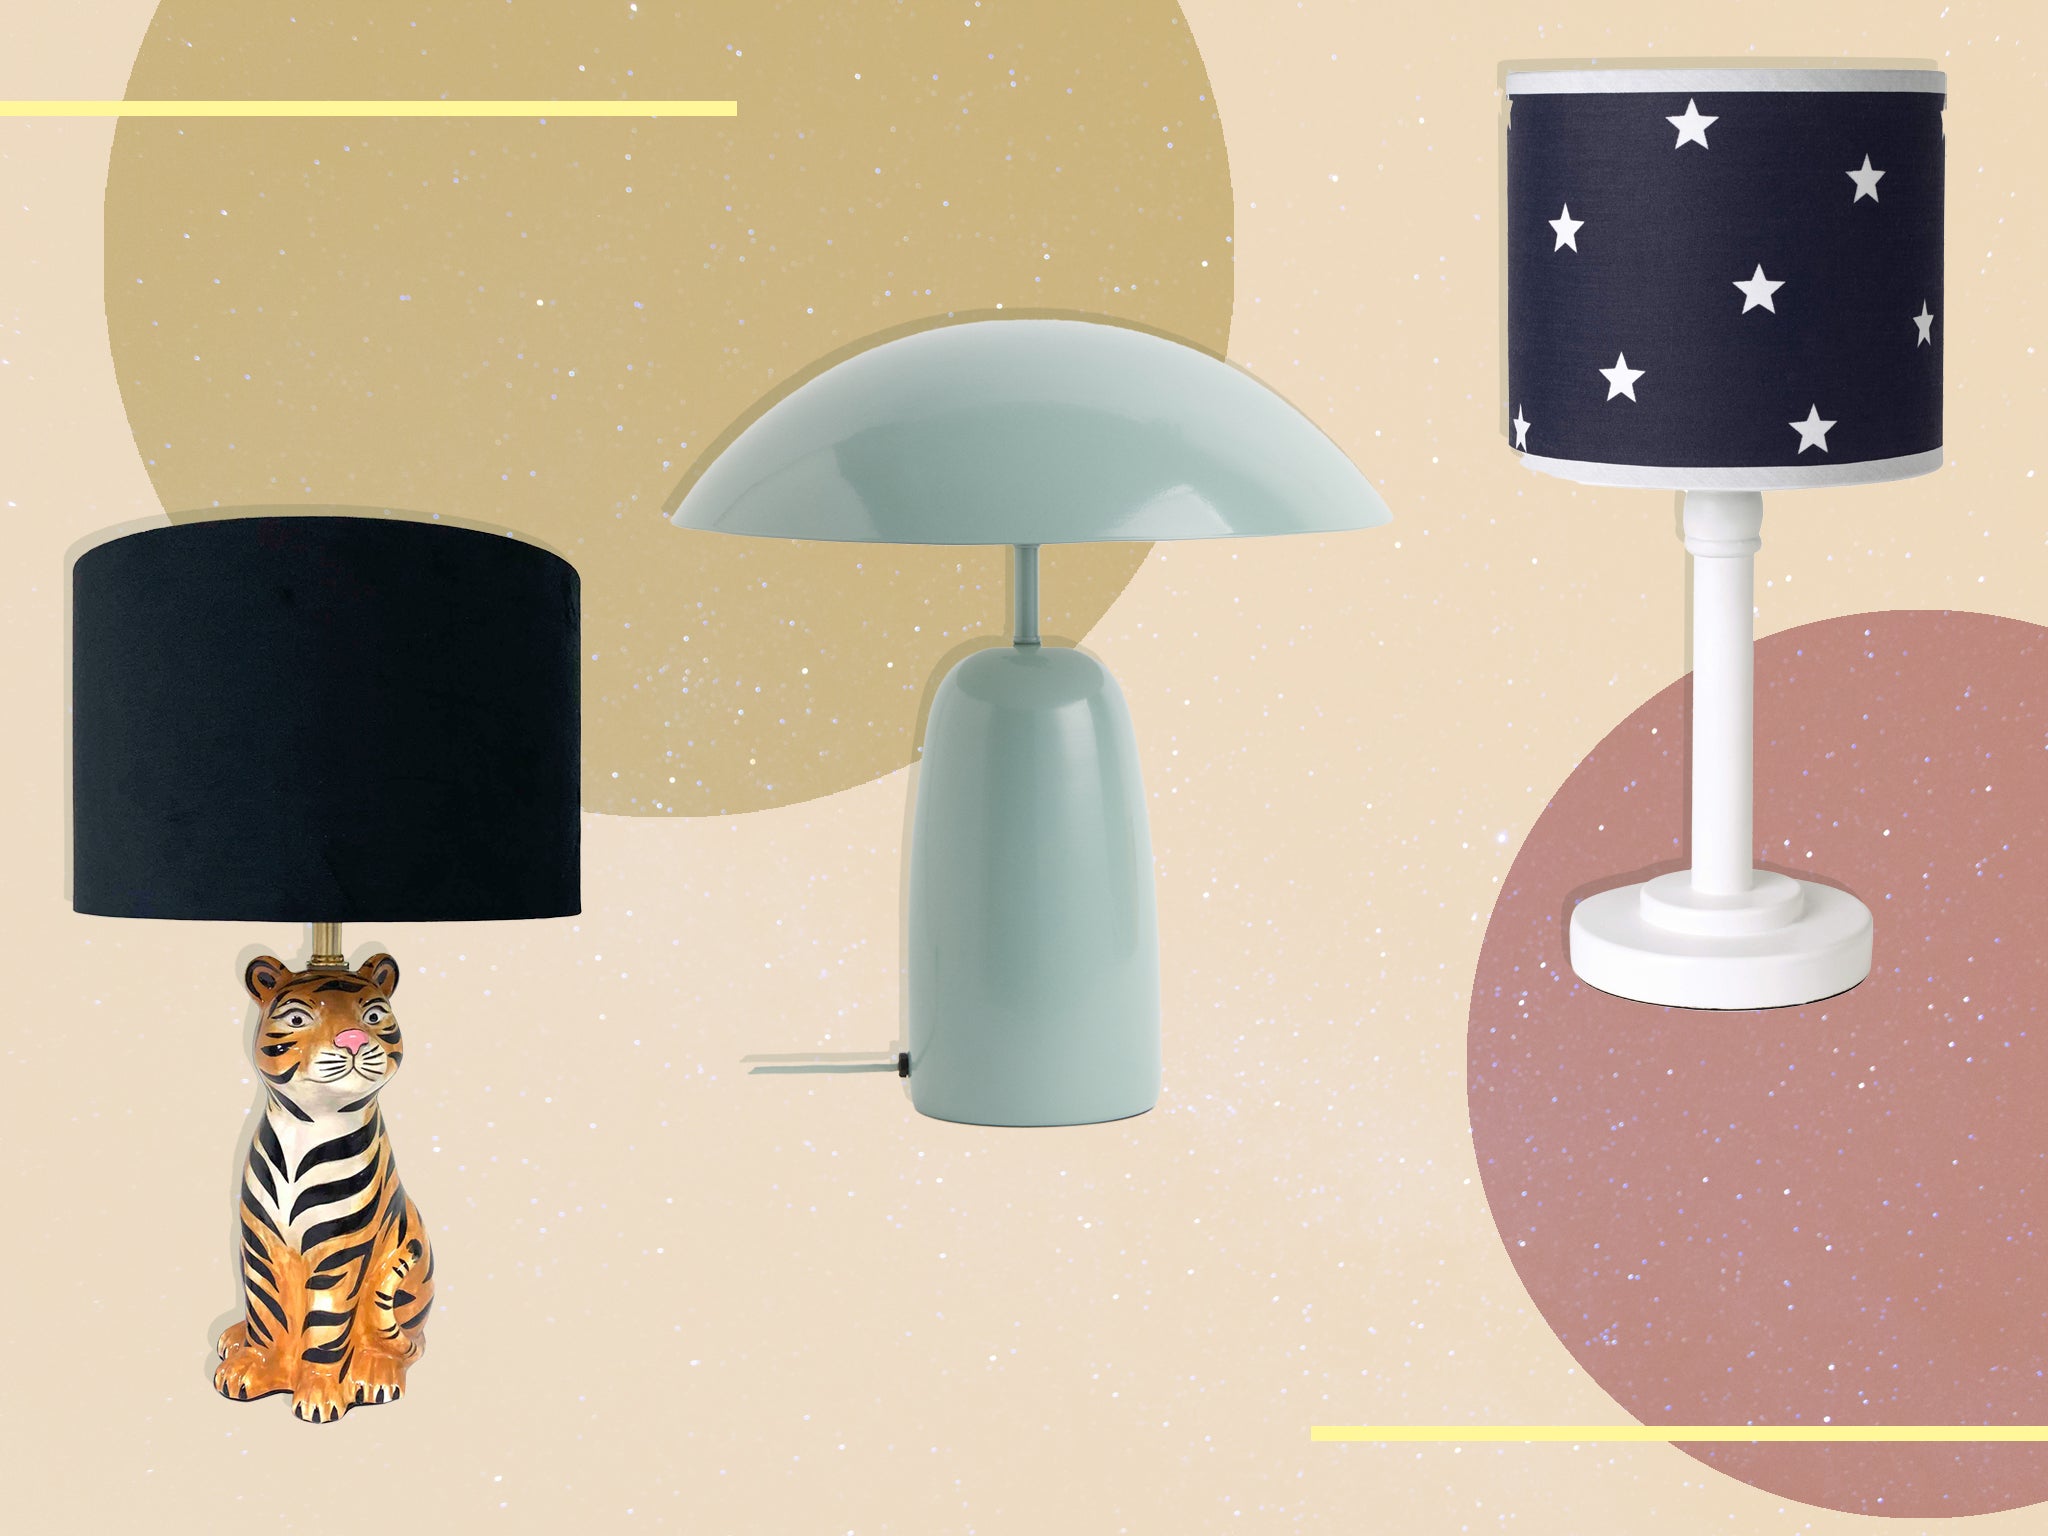 Best kids lamps 2022: Bedside table designs to brighten their room